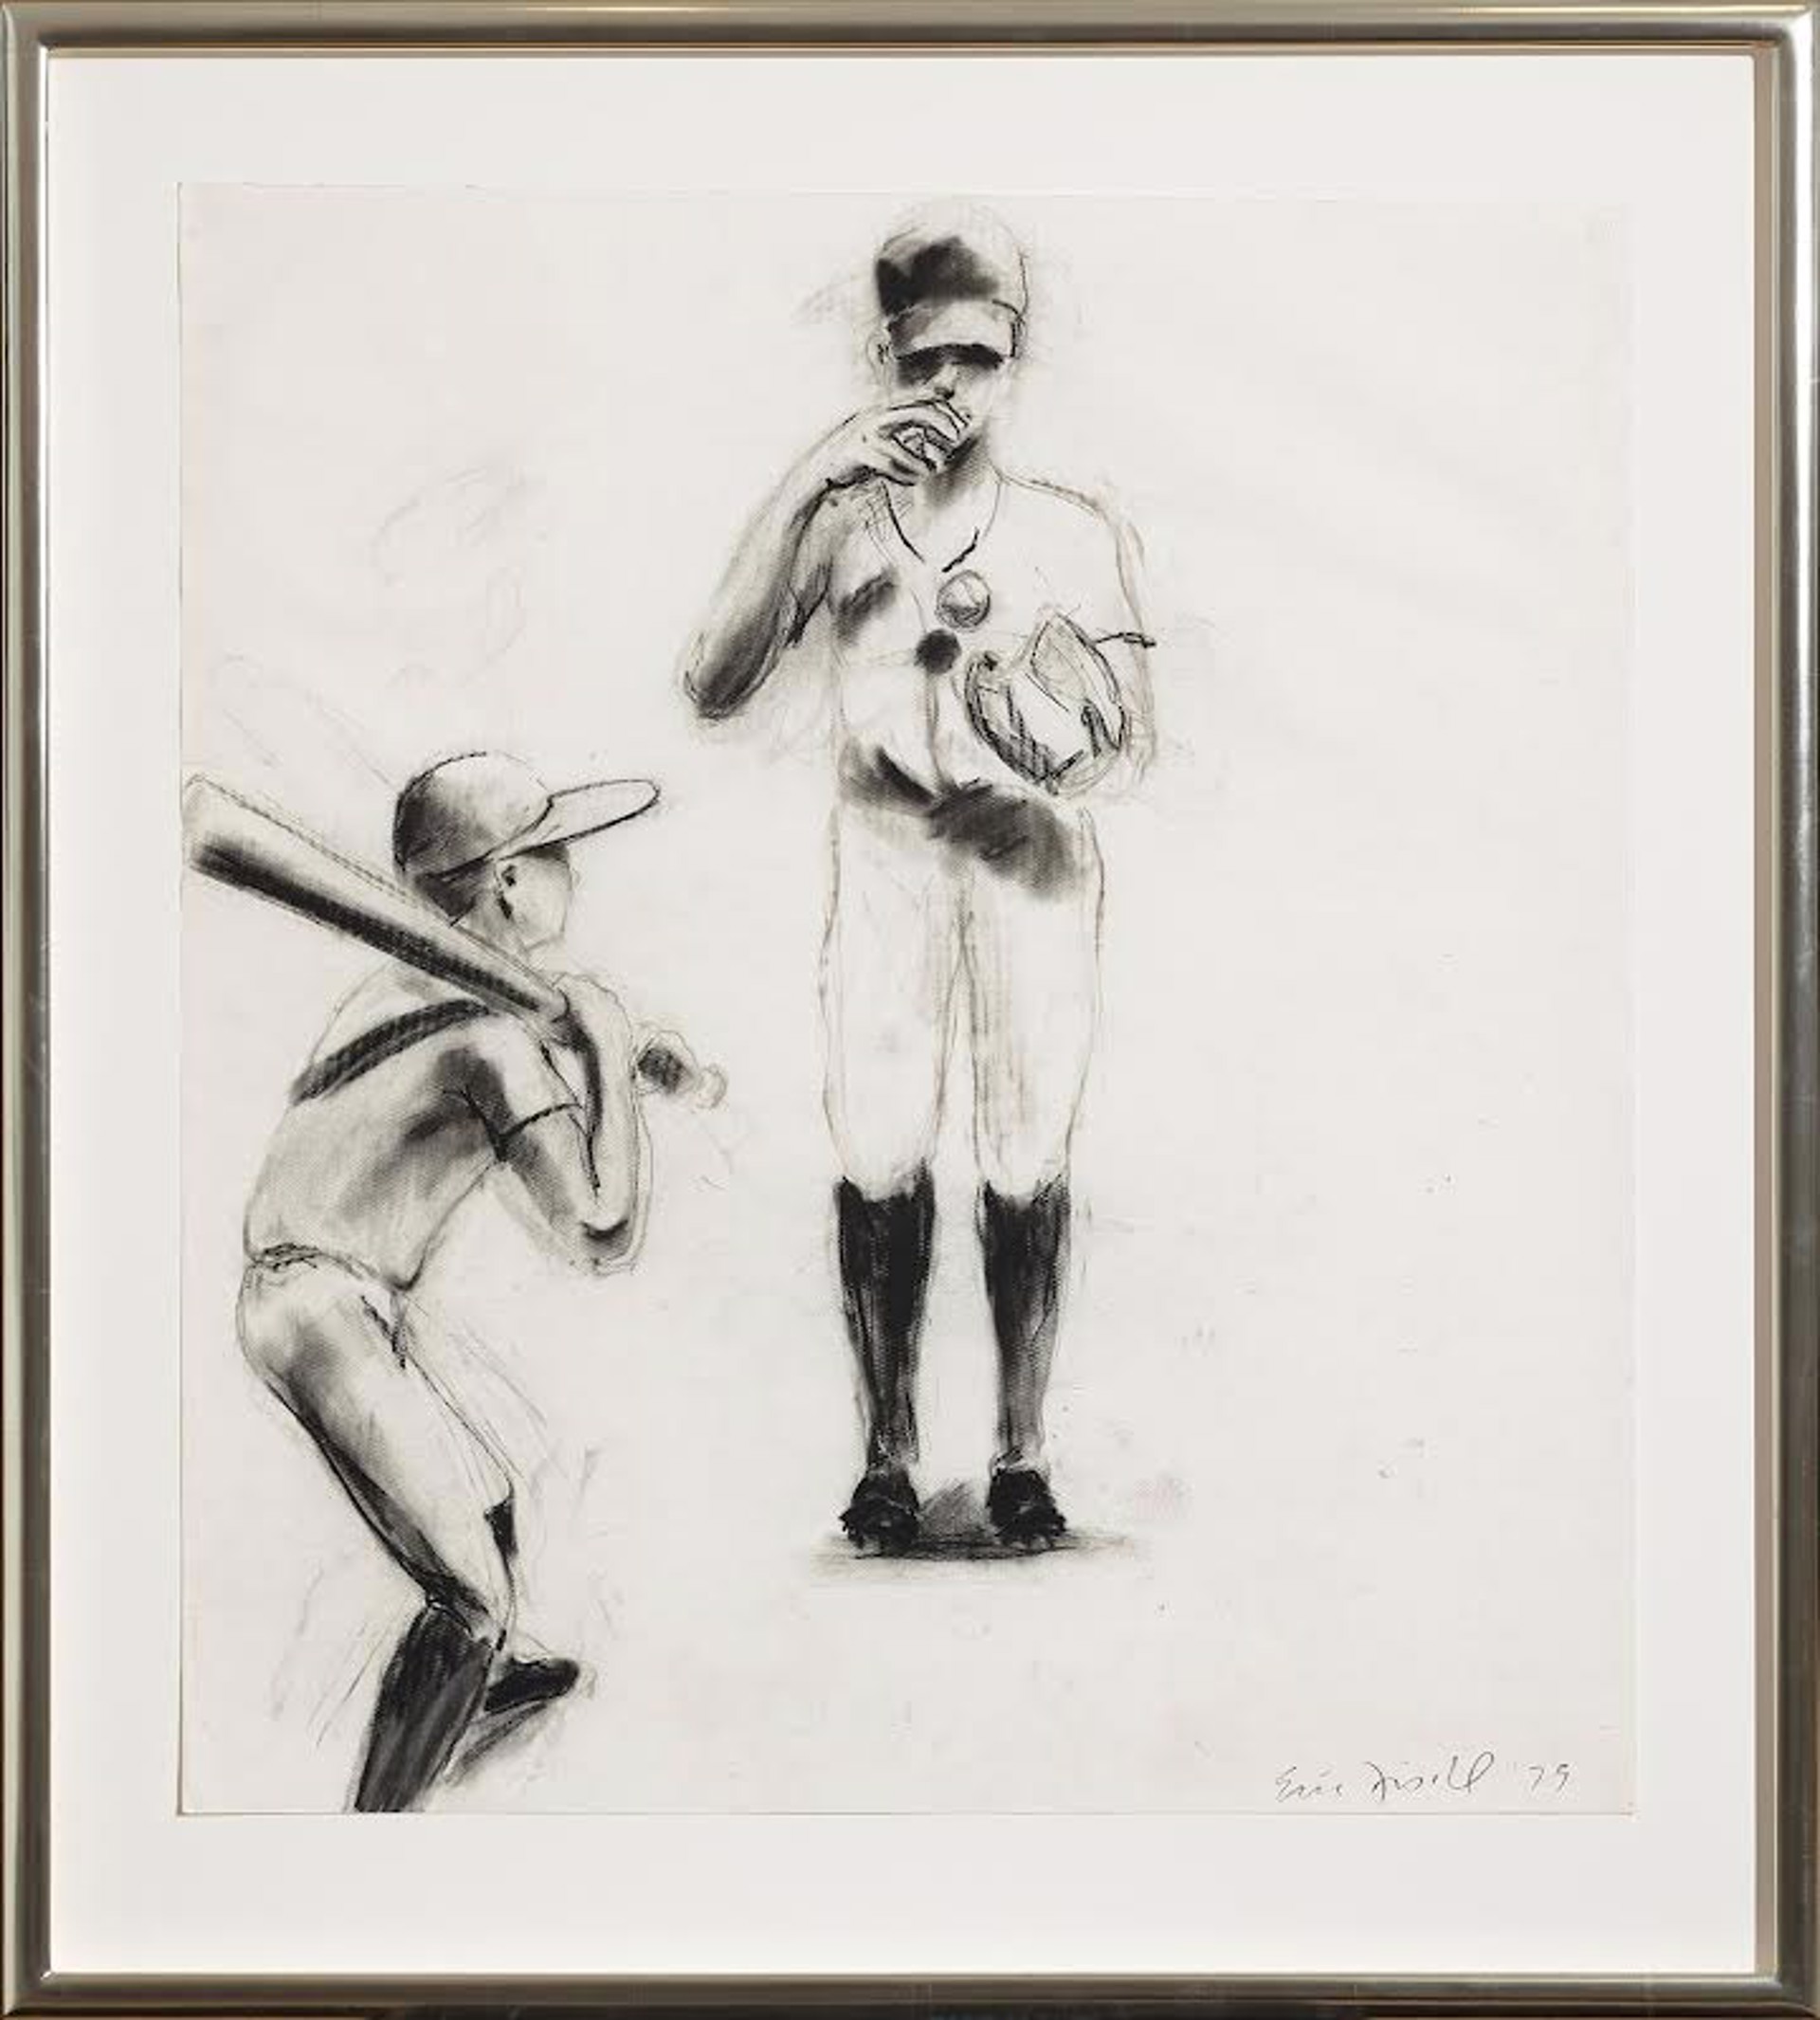 Study for Boys at Bat by Eric Fischl